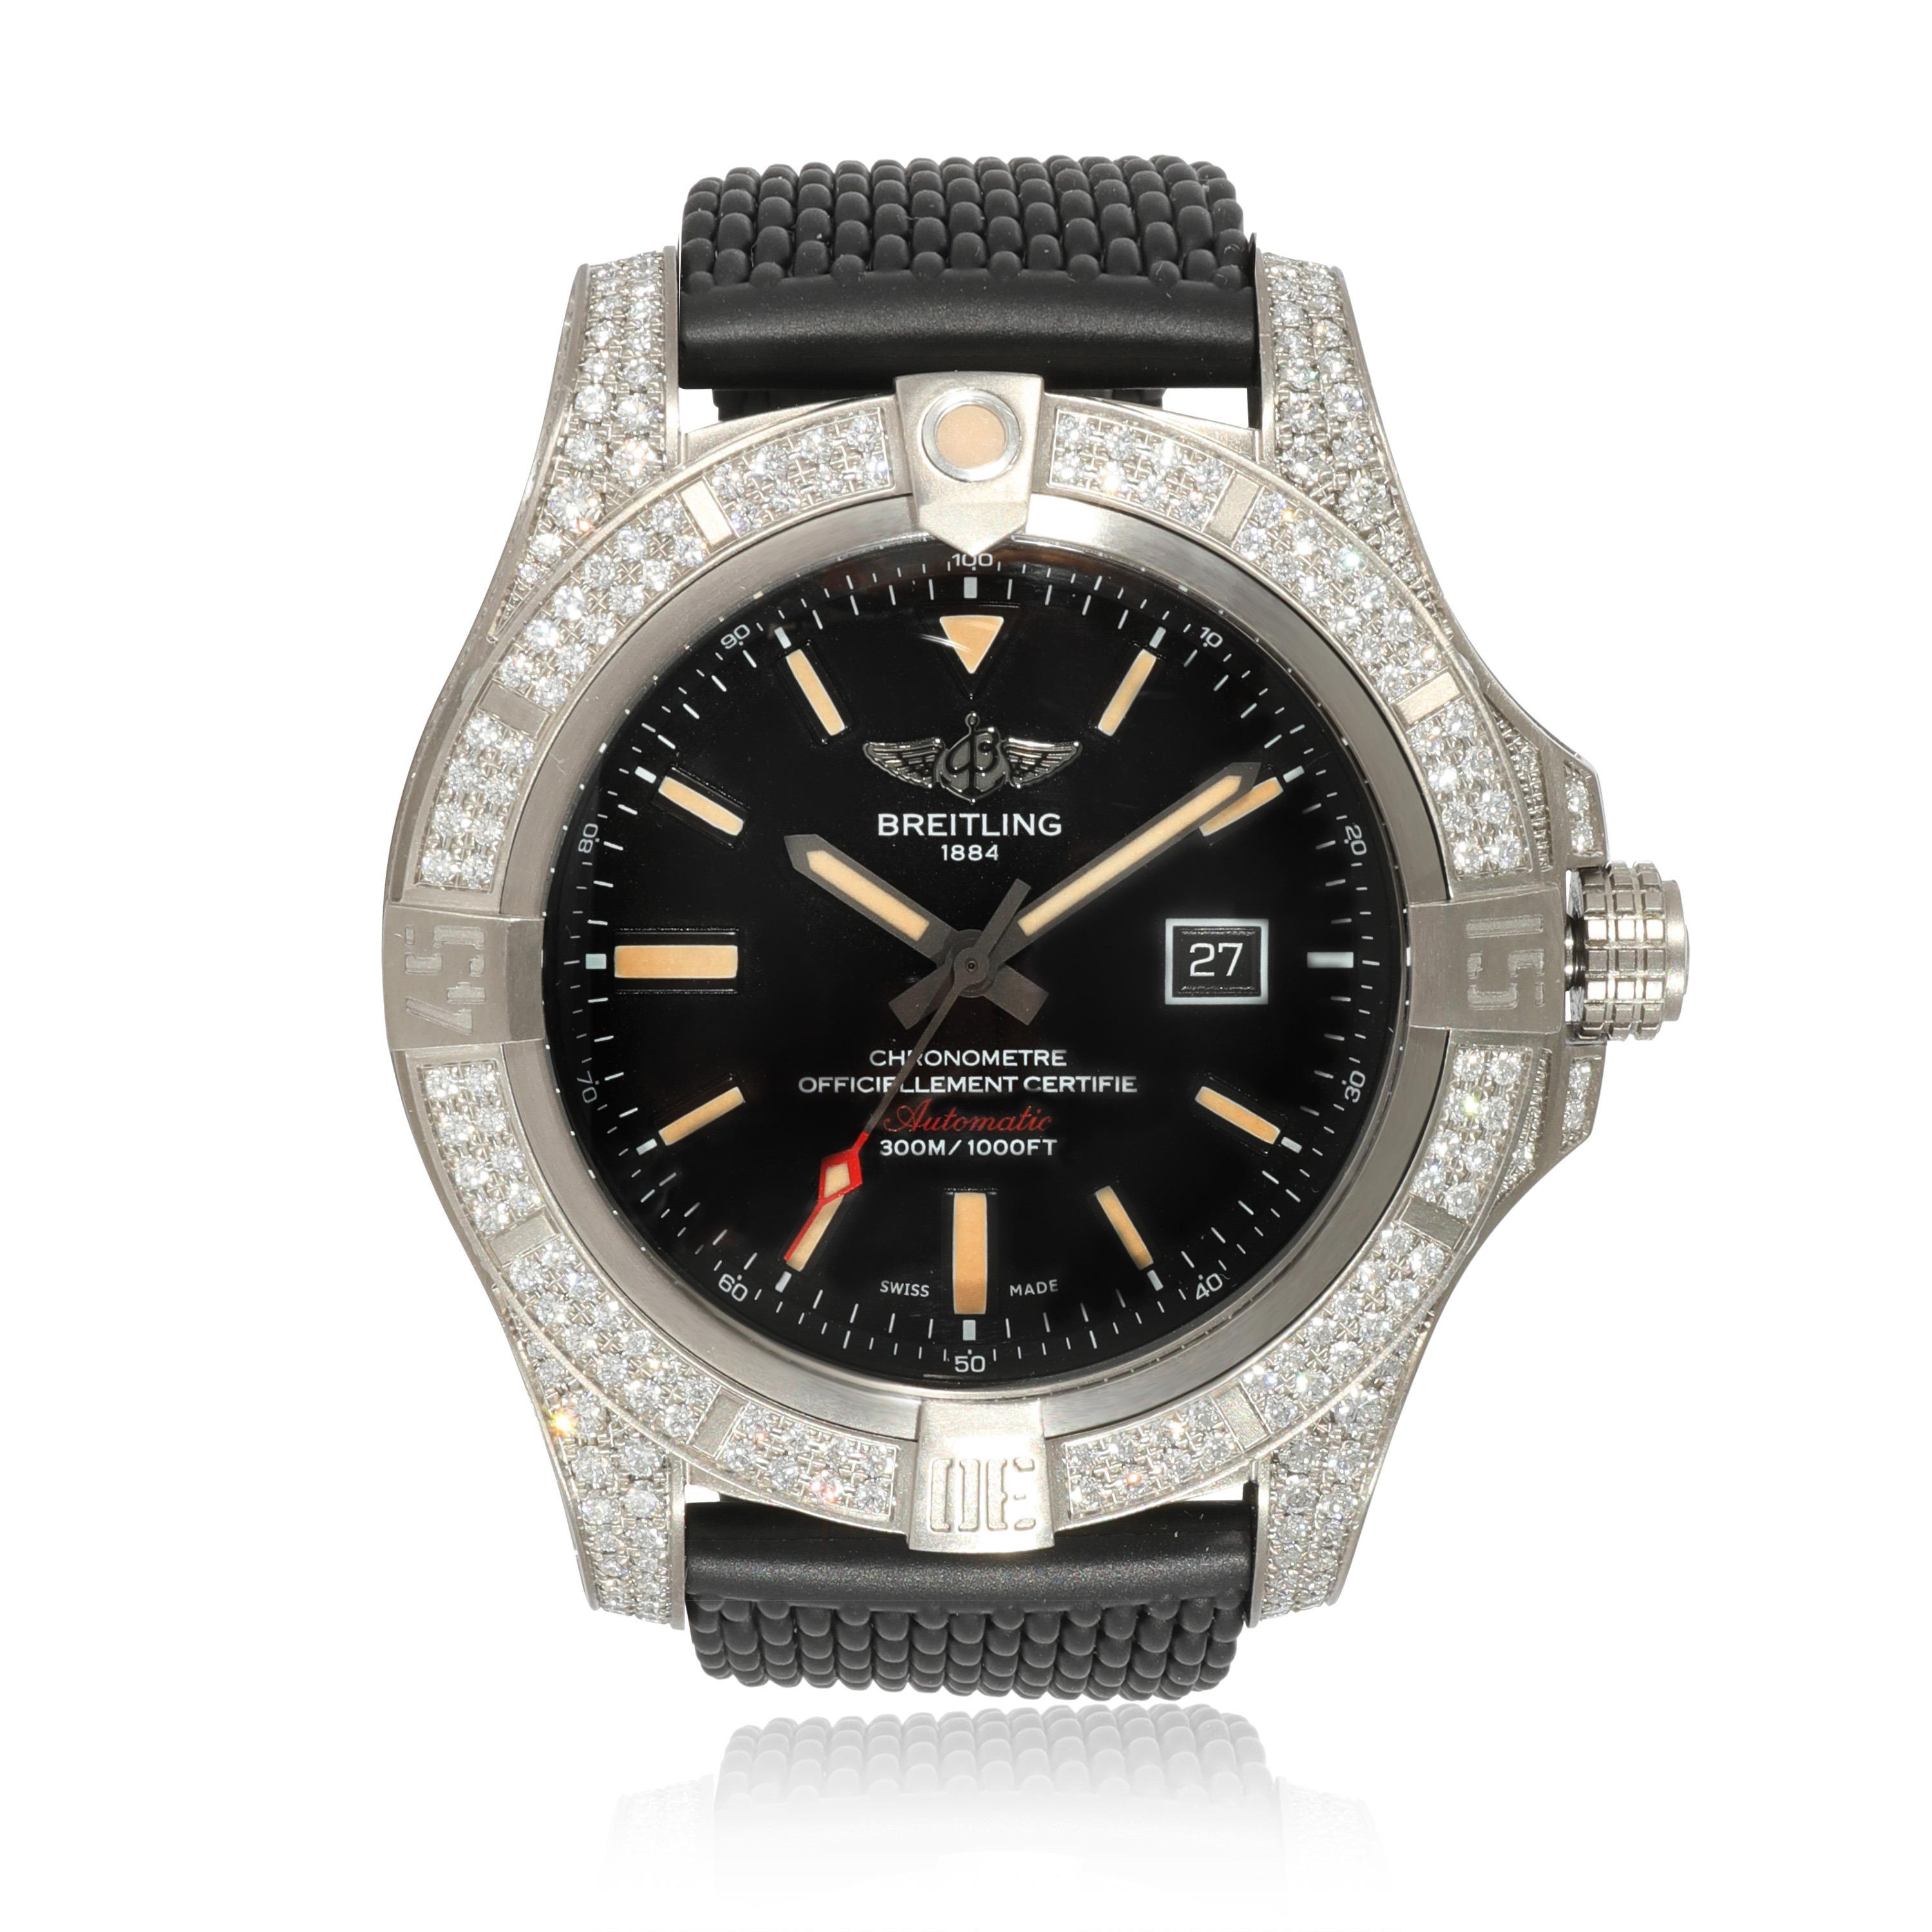 Breitling Avenger Blackbird E1731063 / BD12 Men's Watch in Titanium In Excellent Condition For Sale In New York, NY